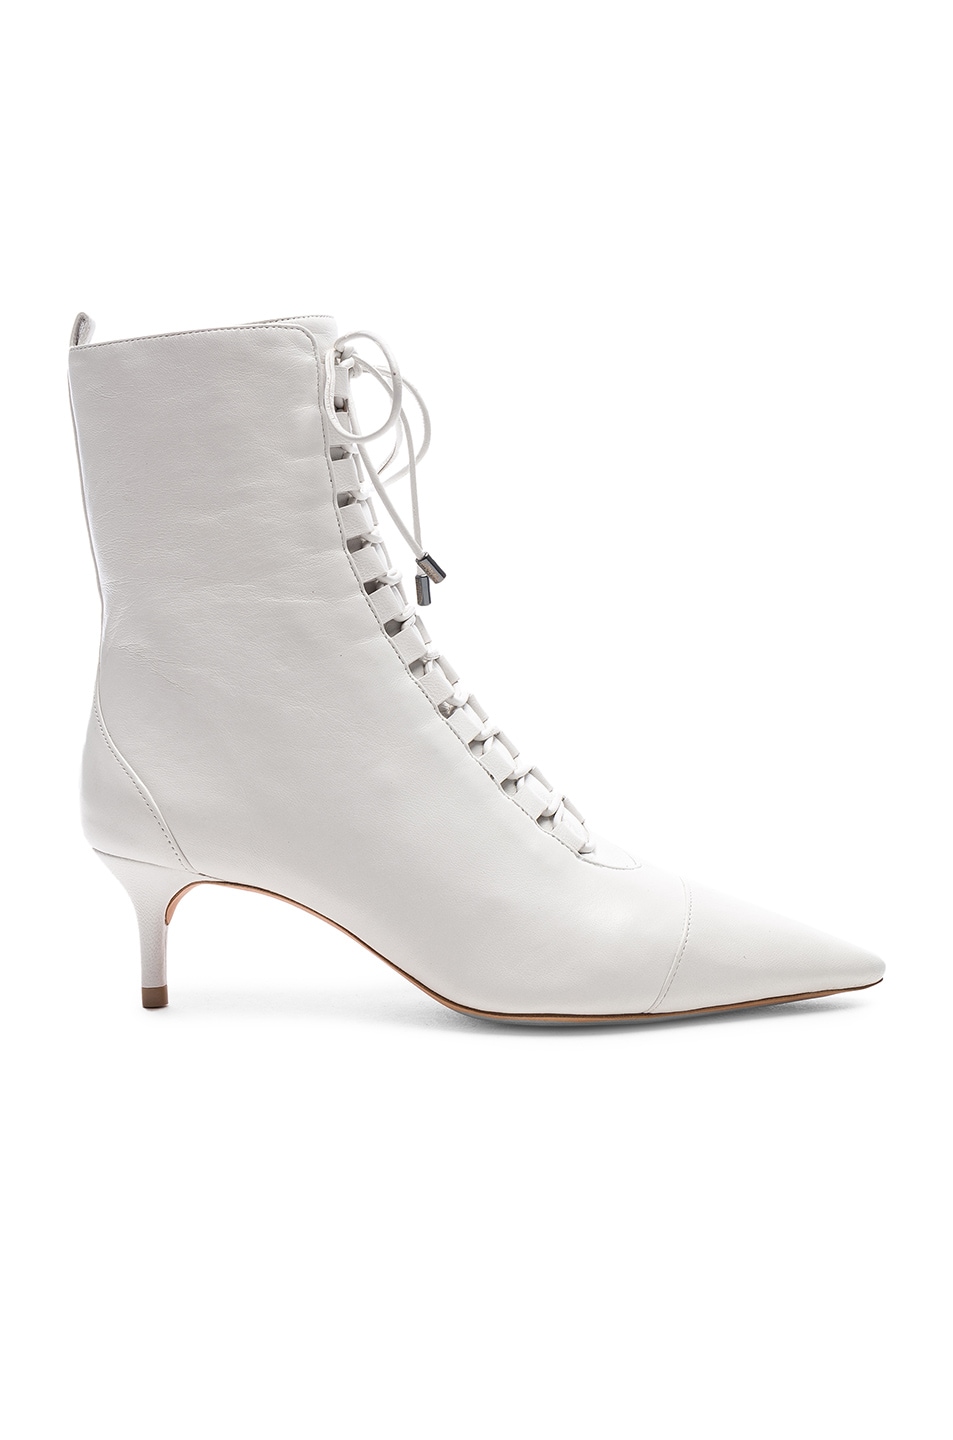 Image 1 of Alexandre Birman Leather Millen Lace Up Ankle Boots in White